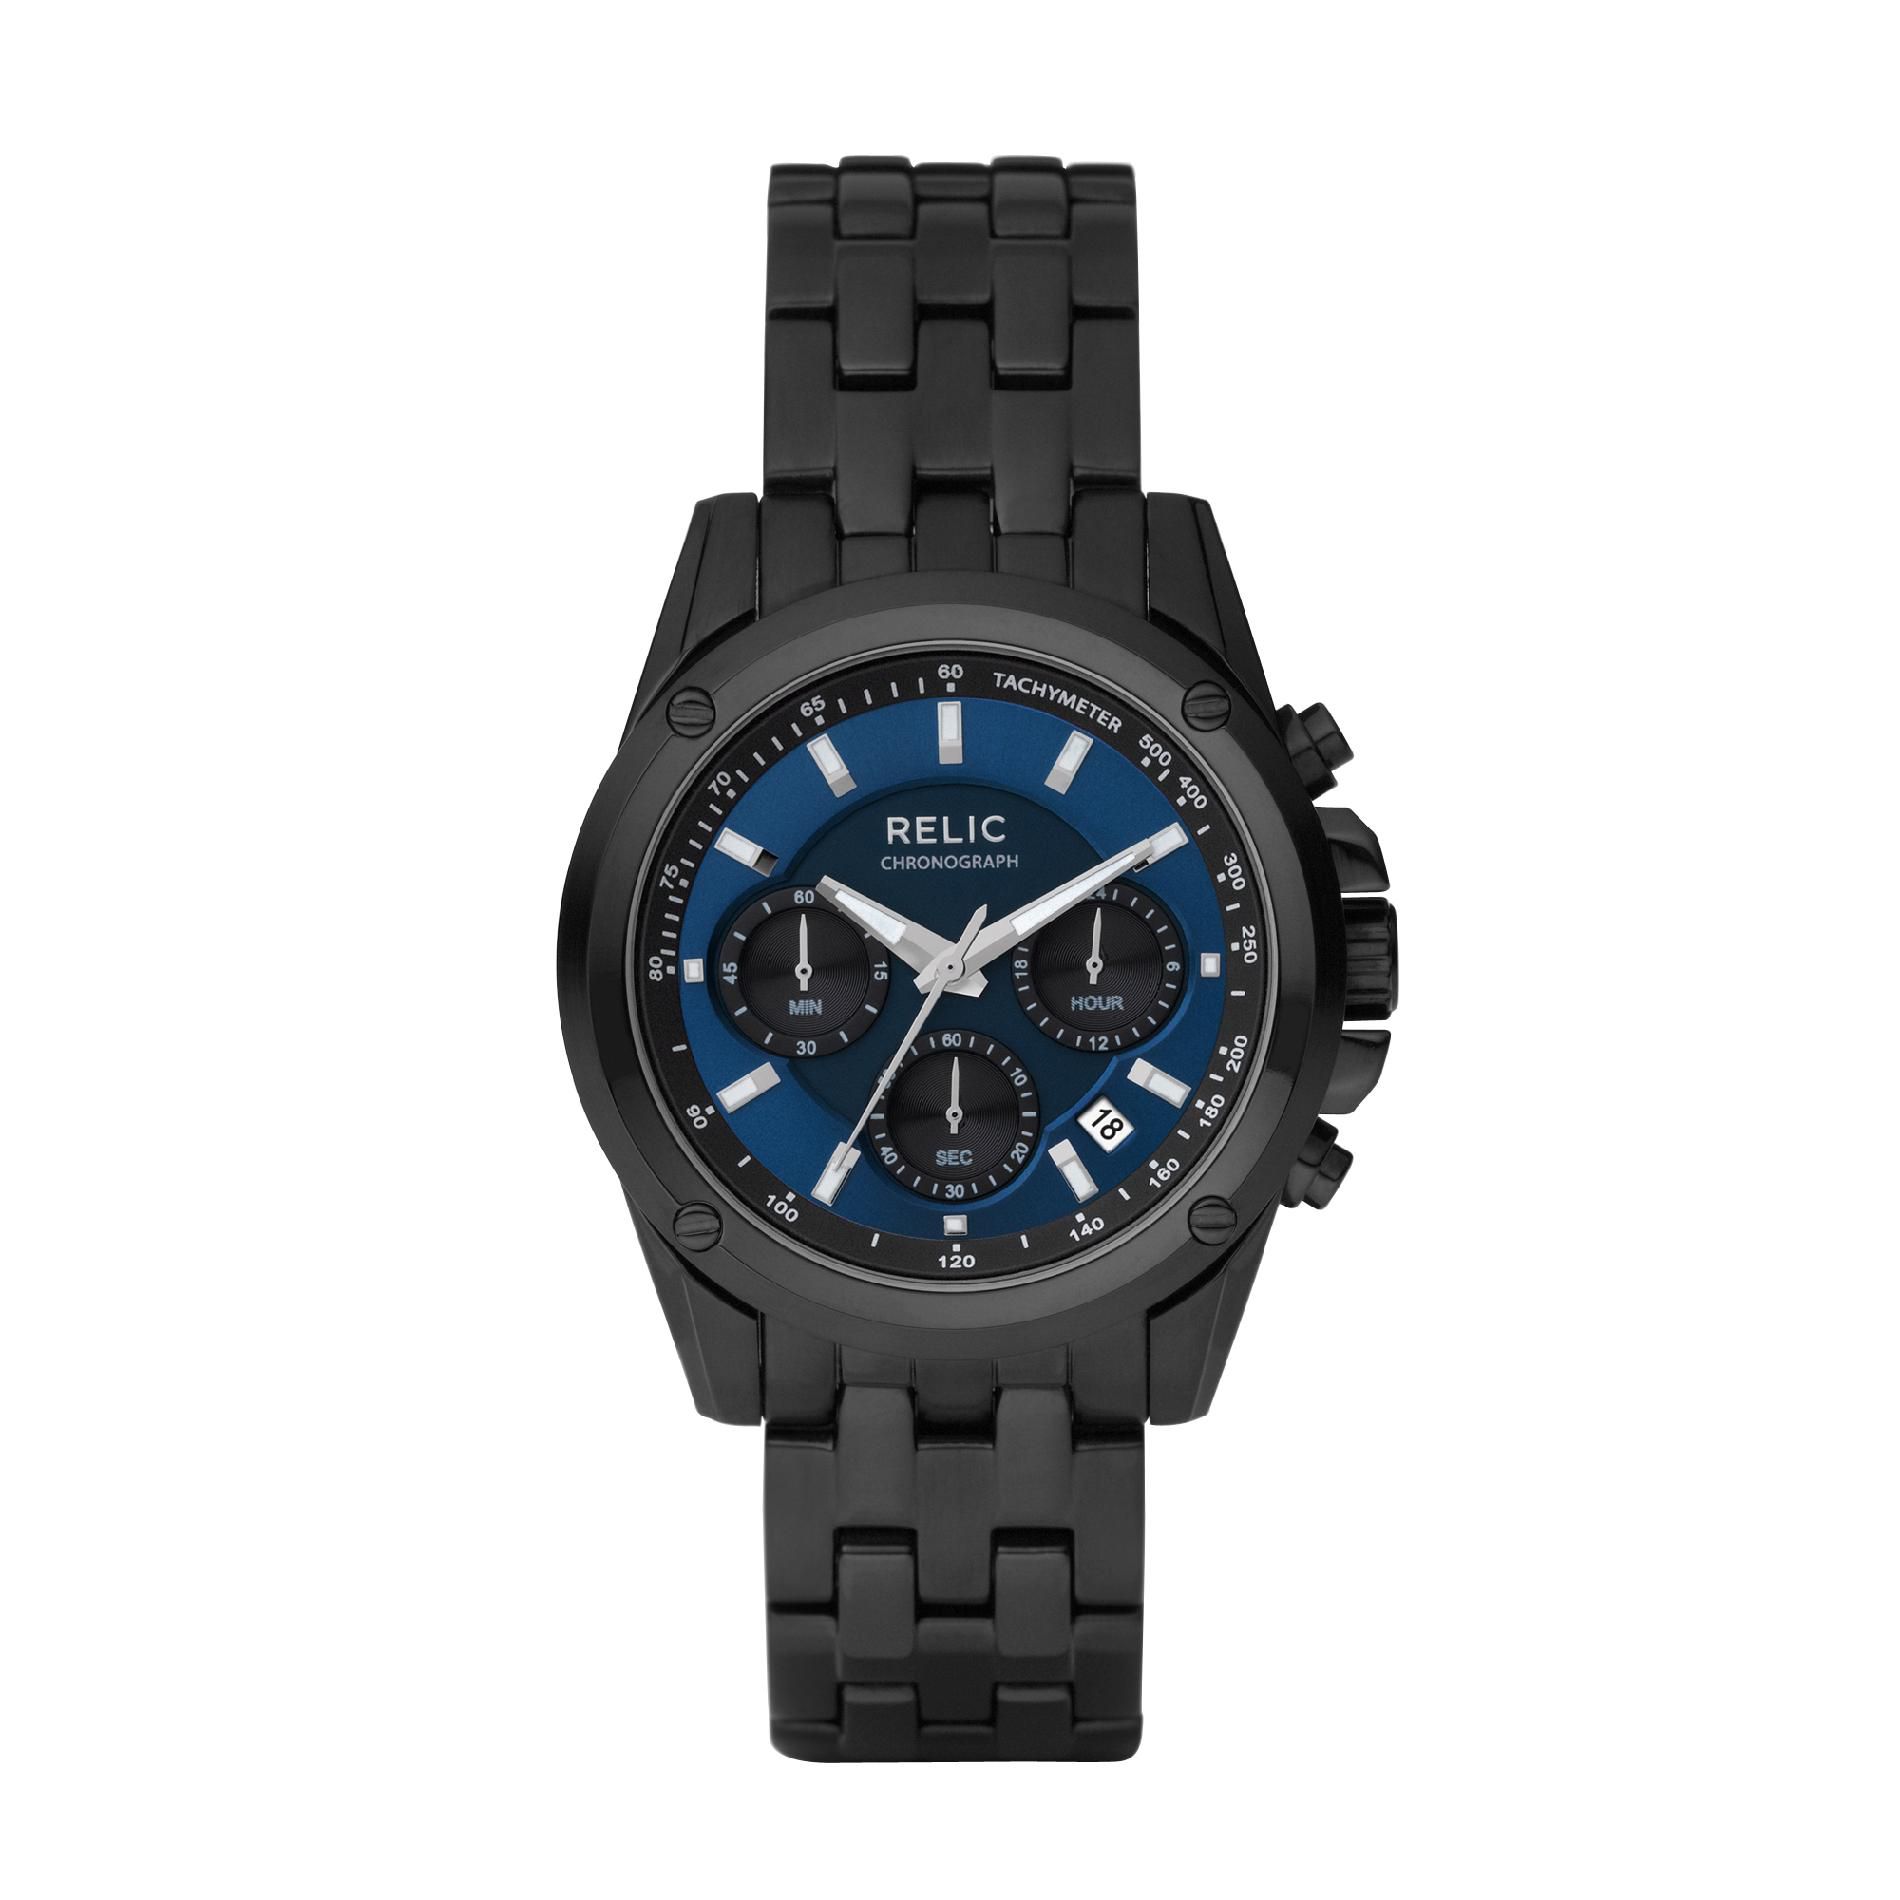 UPC 723765213194 product image for Men's Black Band with Blue Dial Watch | upcitemdb.com